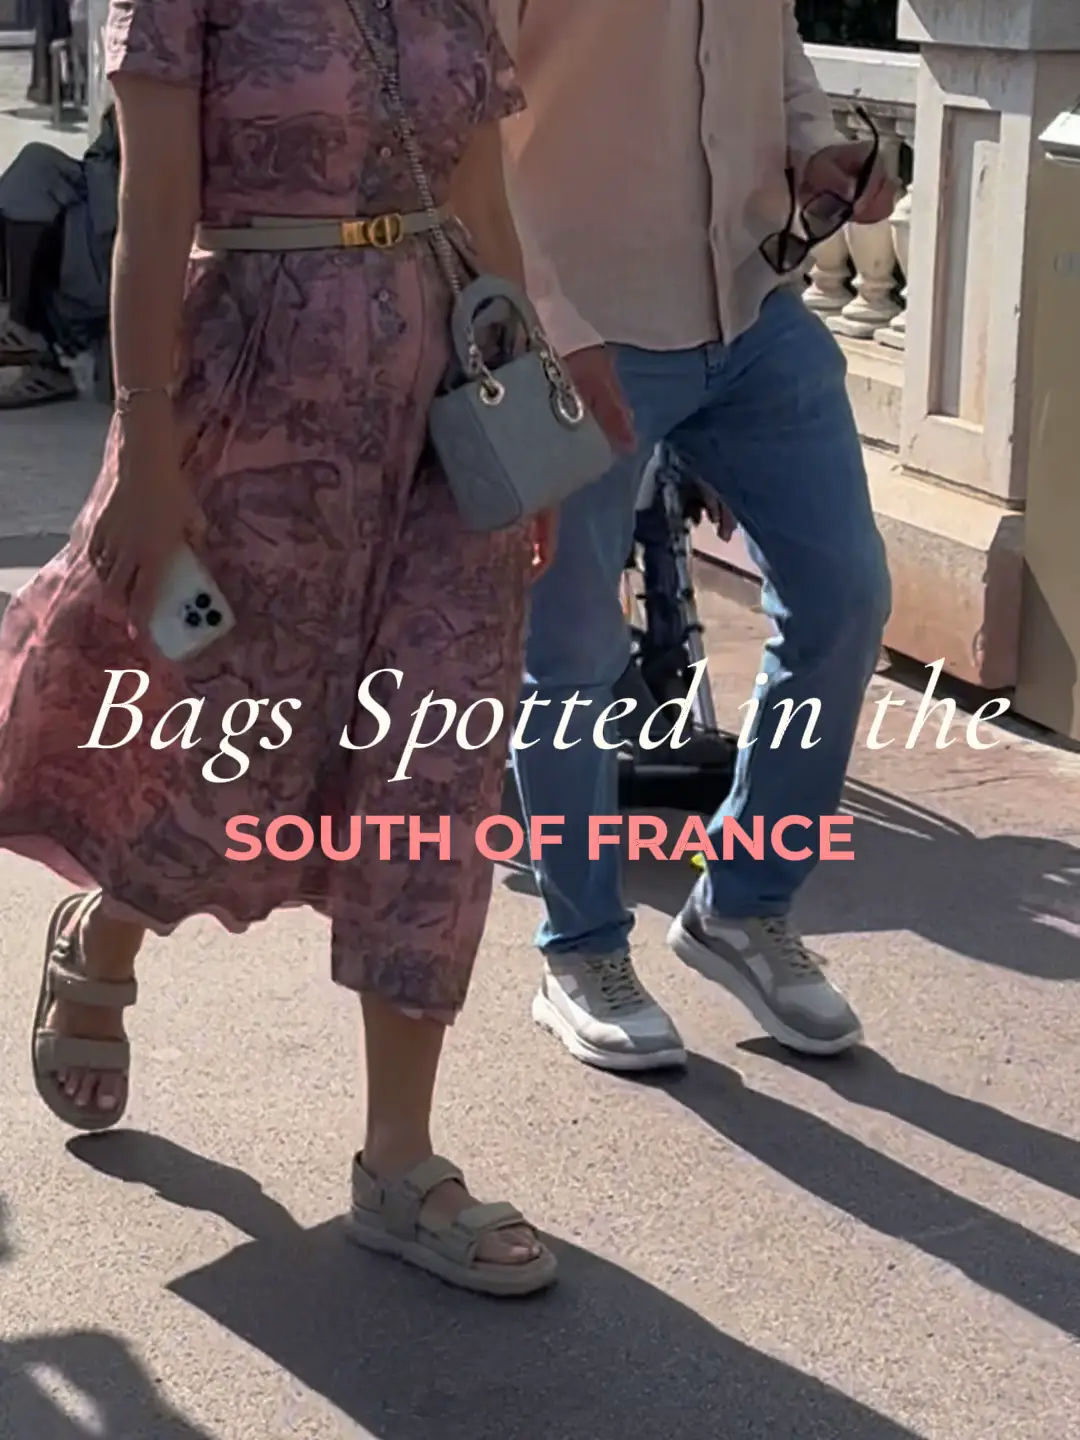 Bags Spotted in the South of France!